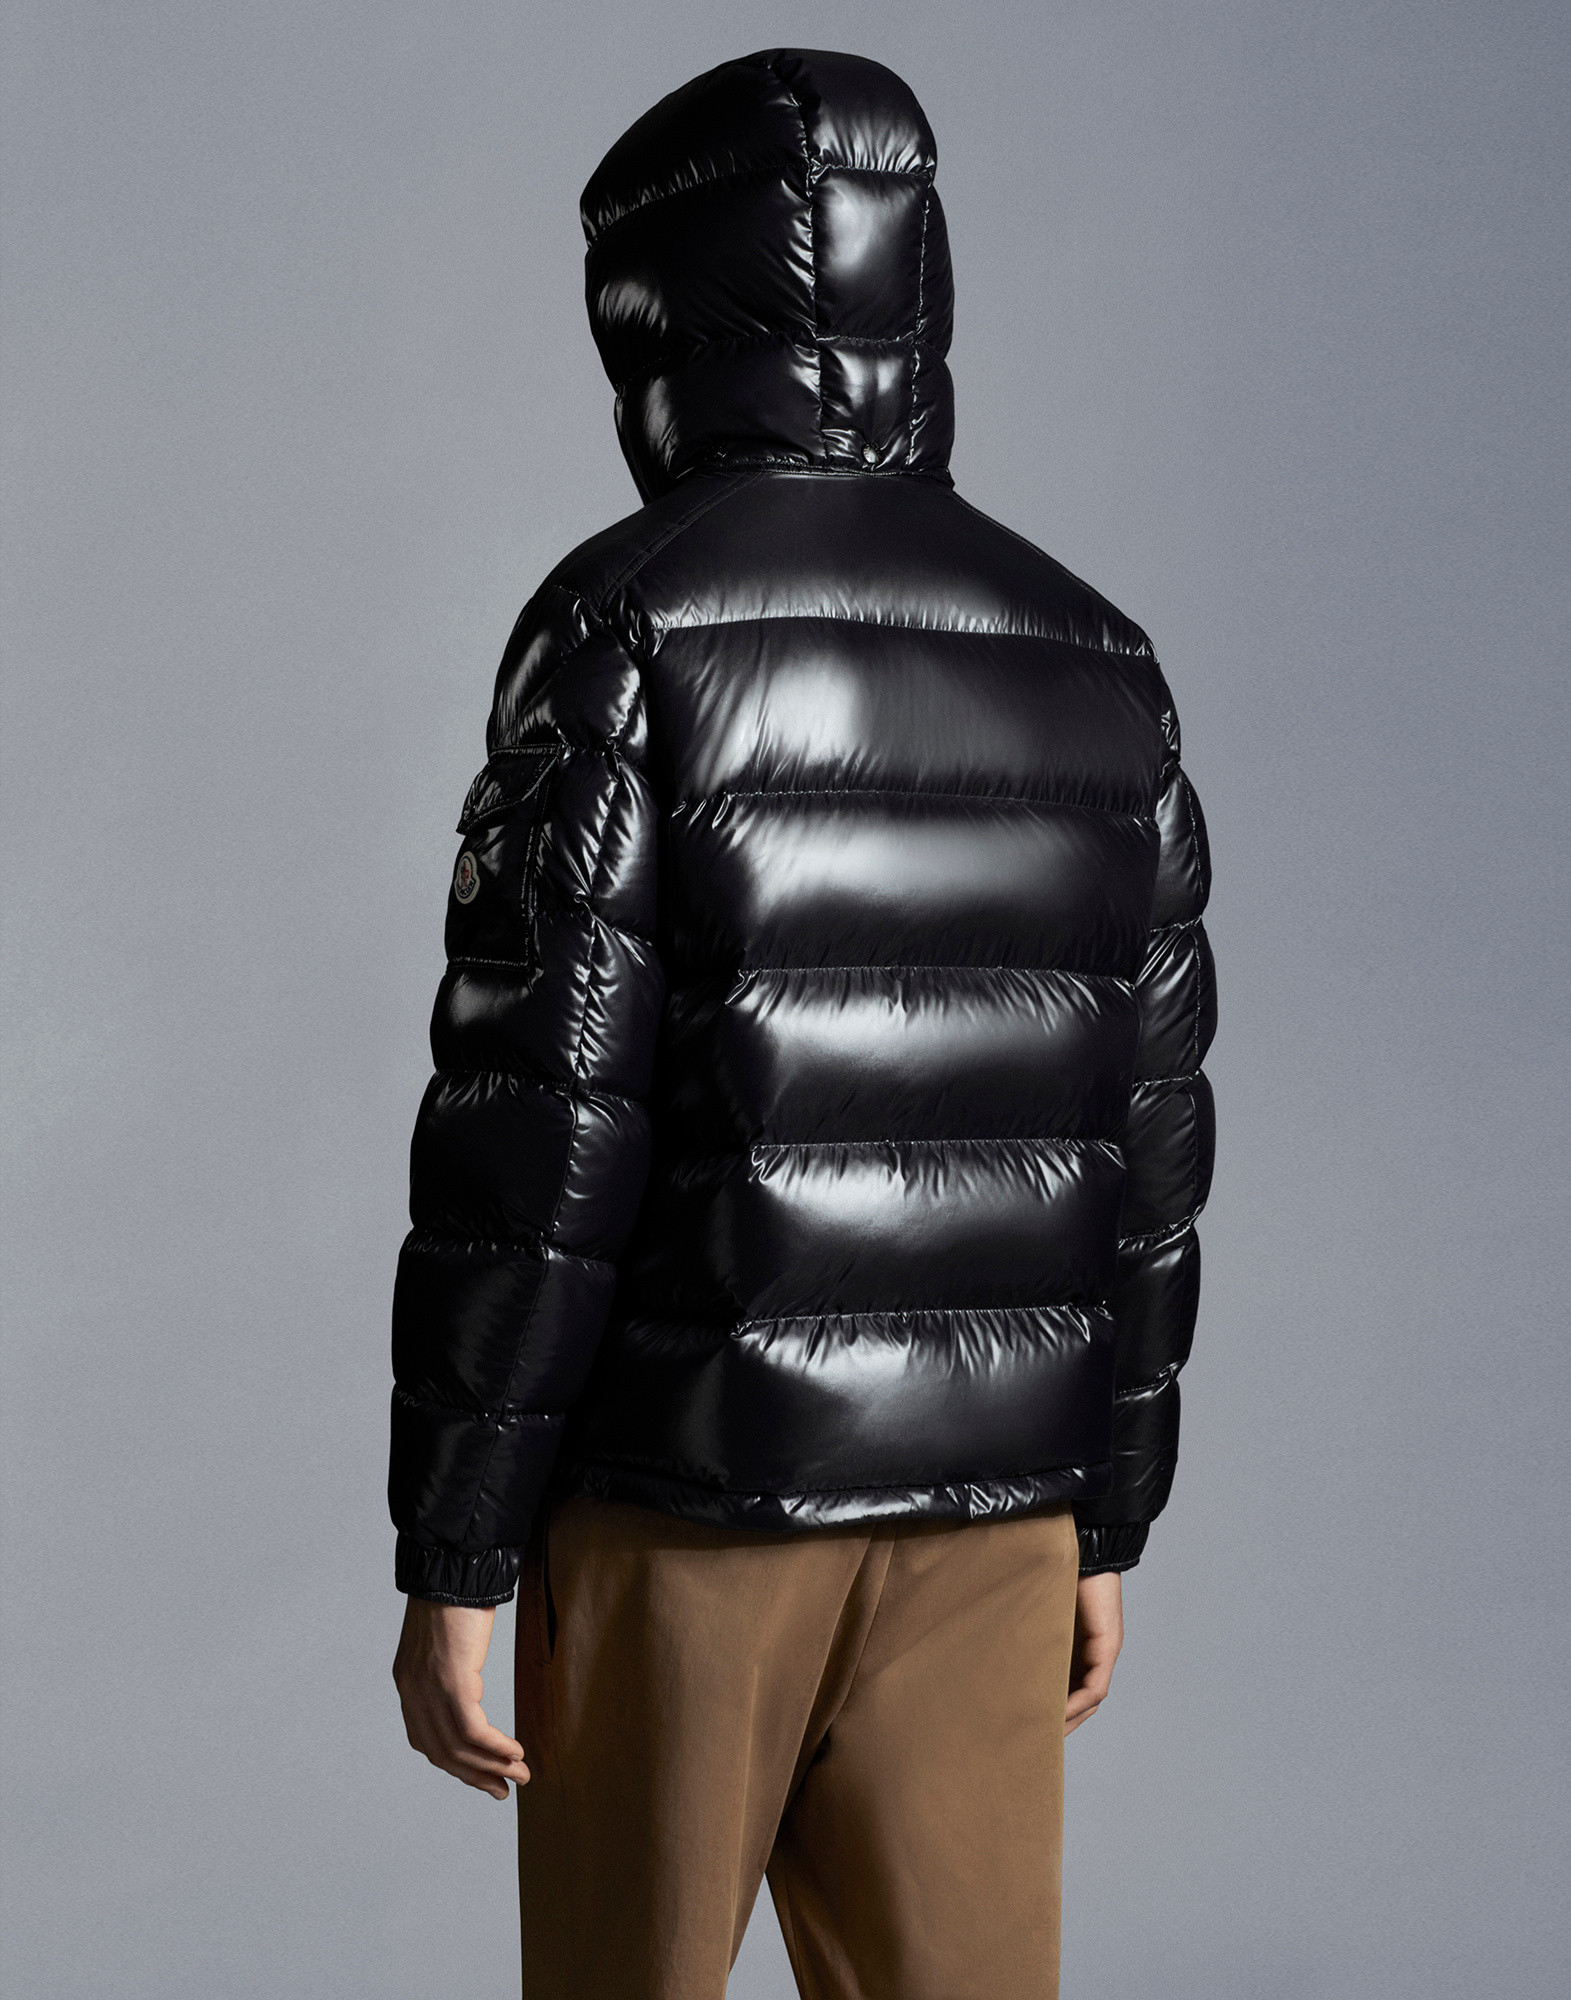 Men's Clothing, Accessories and Down Jackets | Moncler NO